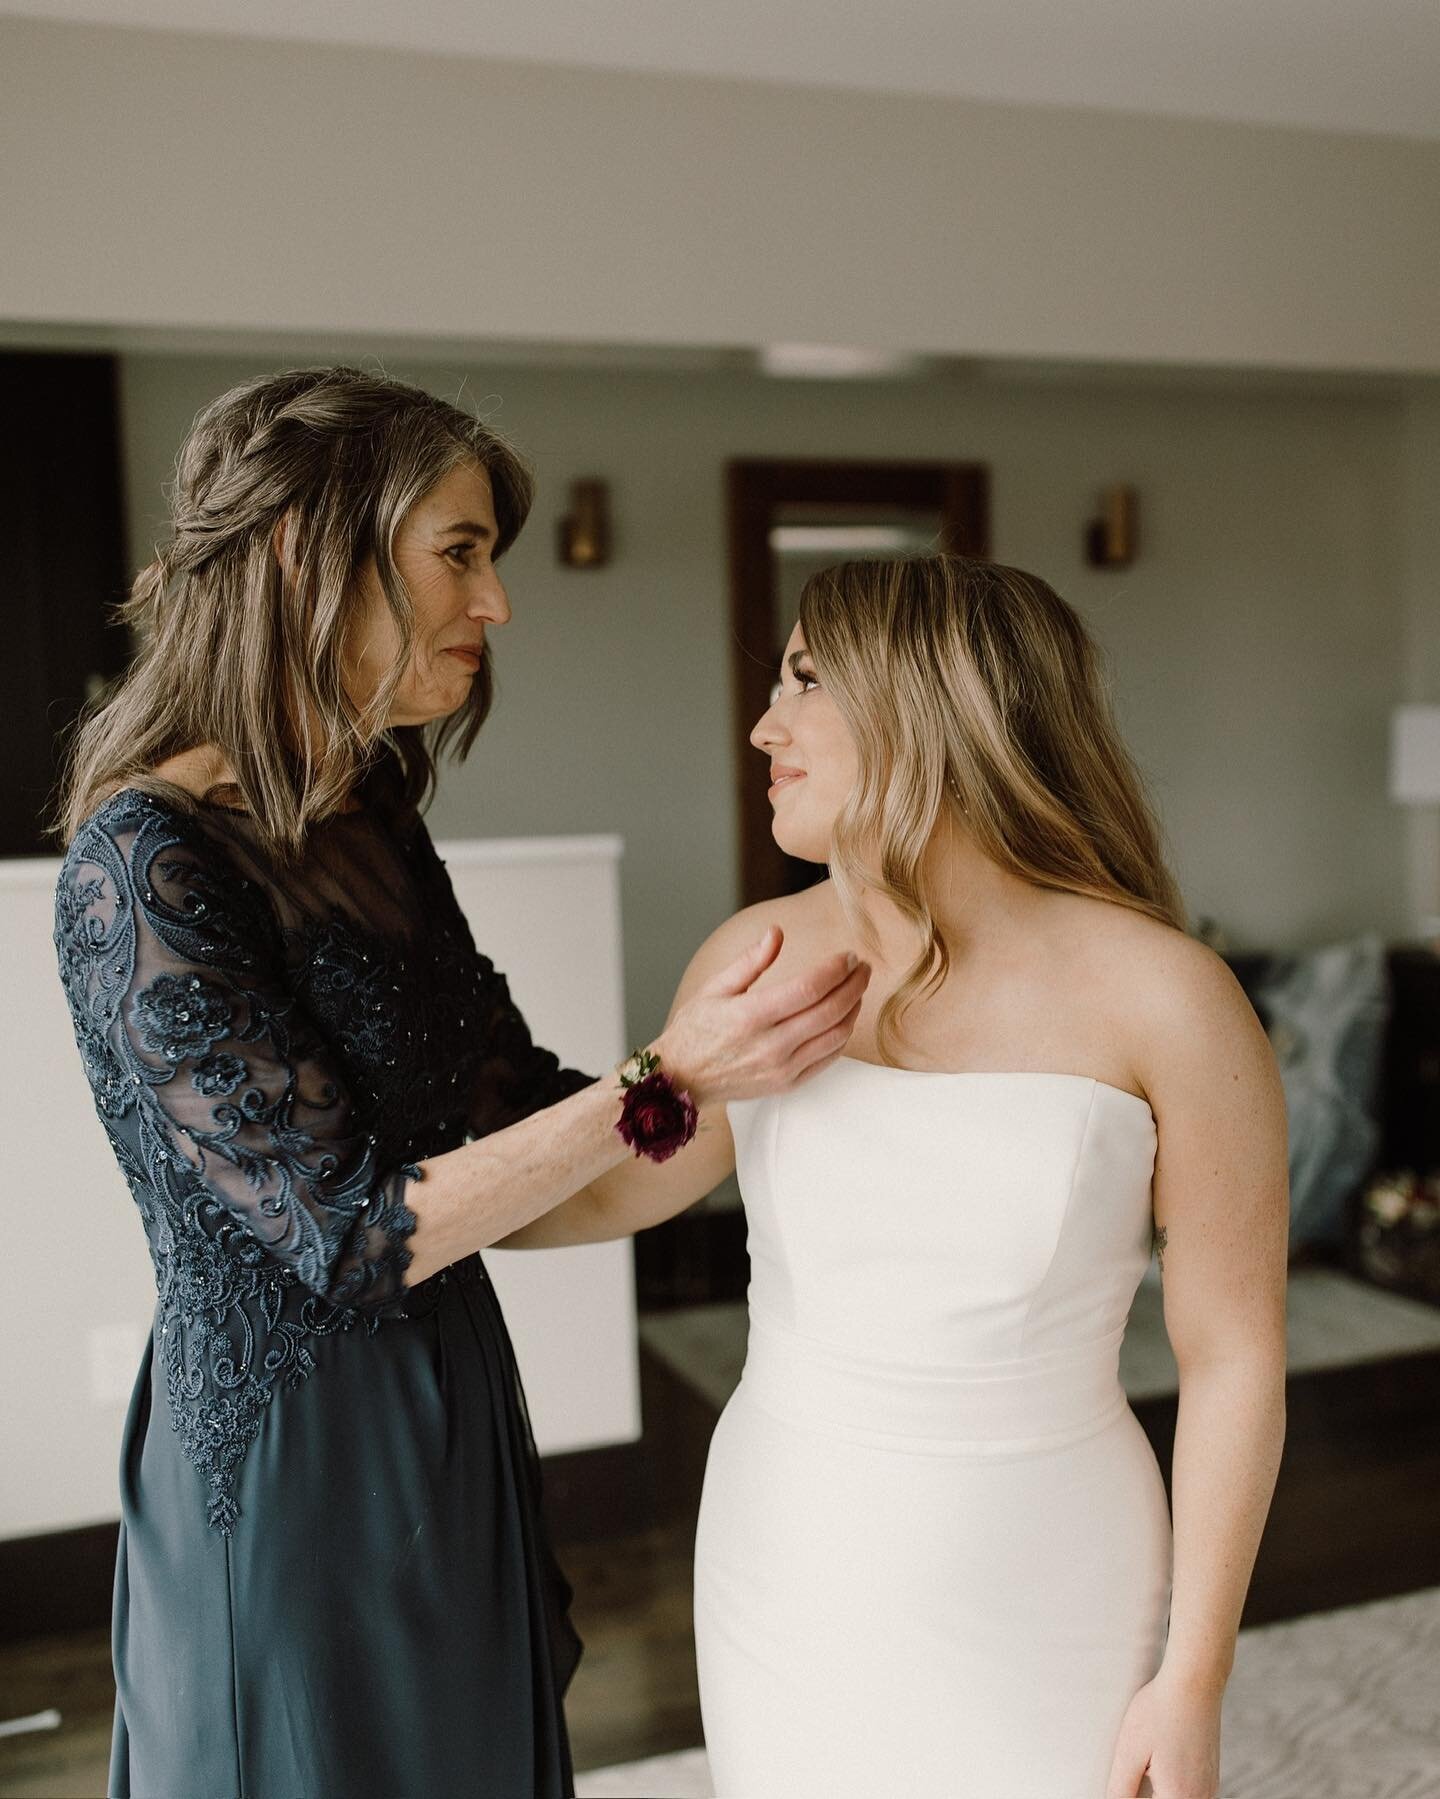 To every mom, whatever that word means to you, you are a treasure. The most beautiful women can exude both strength and gentleness&hellip; you so effortlessly show us those qualities everyday. Happy Mother&rsquo;s Day! 🌷
⁠
#weddingphotography #weddi